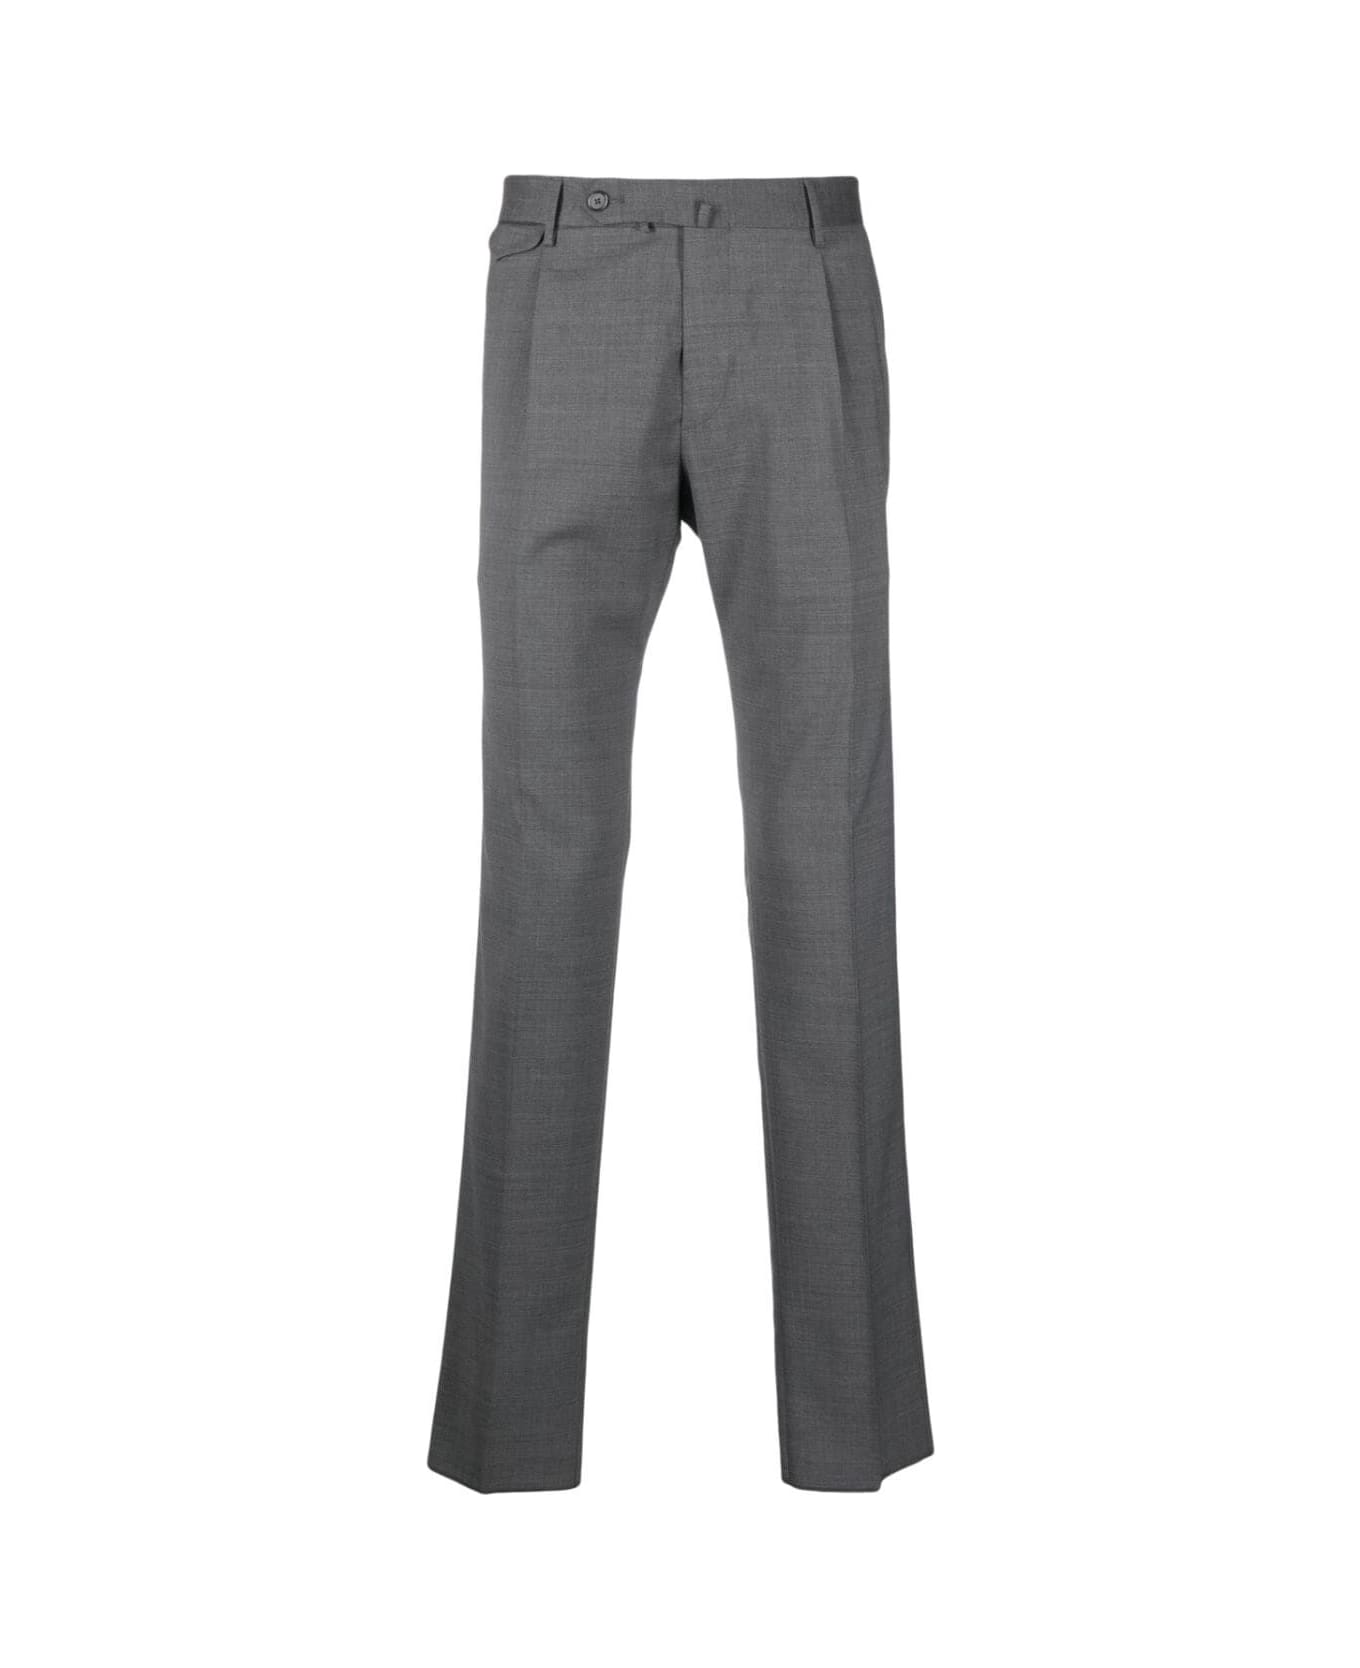 Tagliatore Classic Trousers With Pences - Medium Grey ボトムス